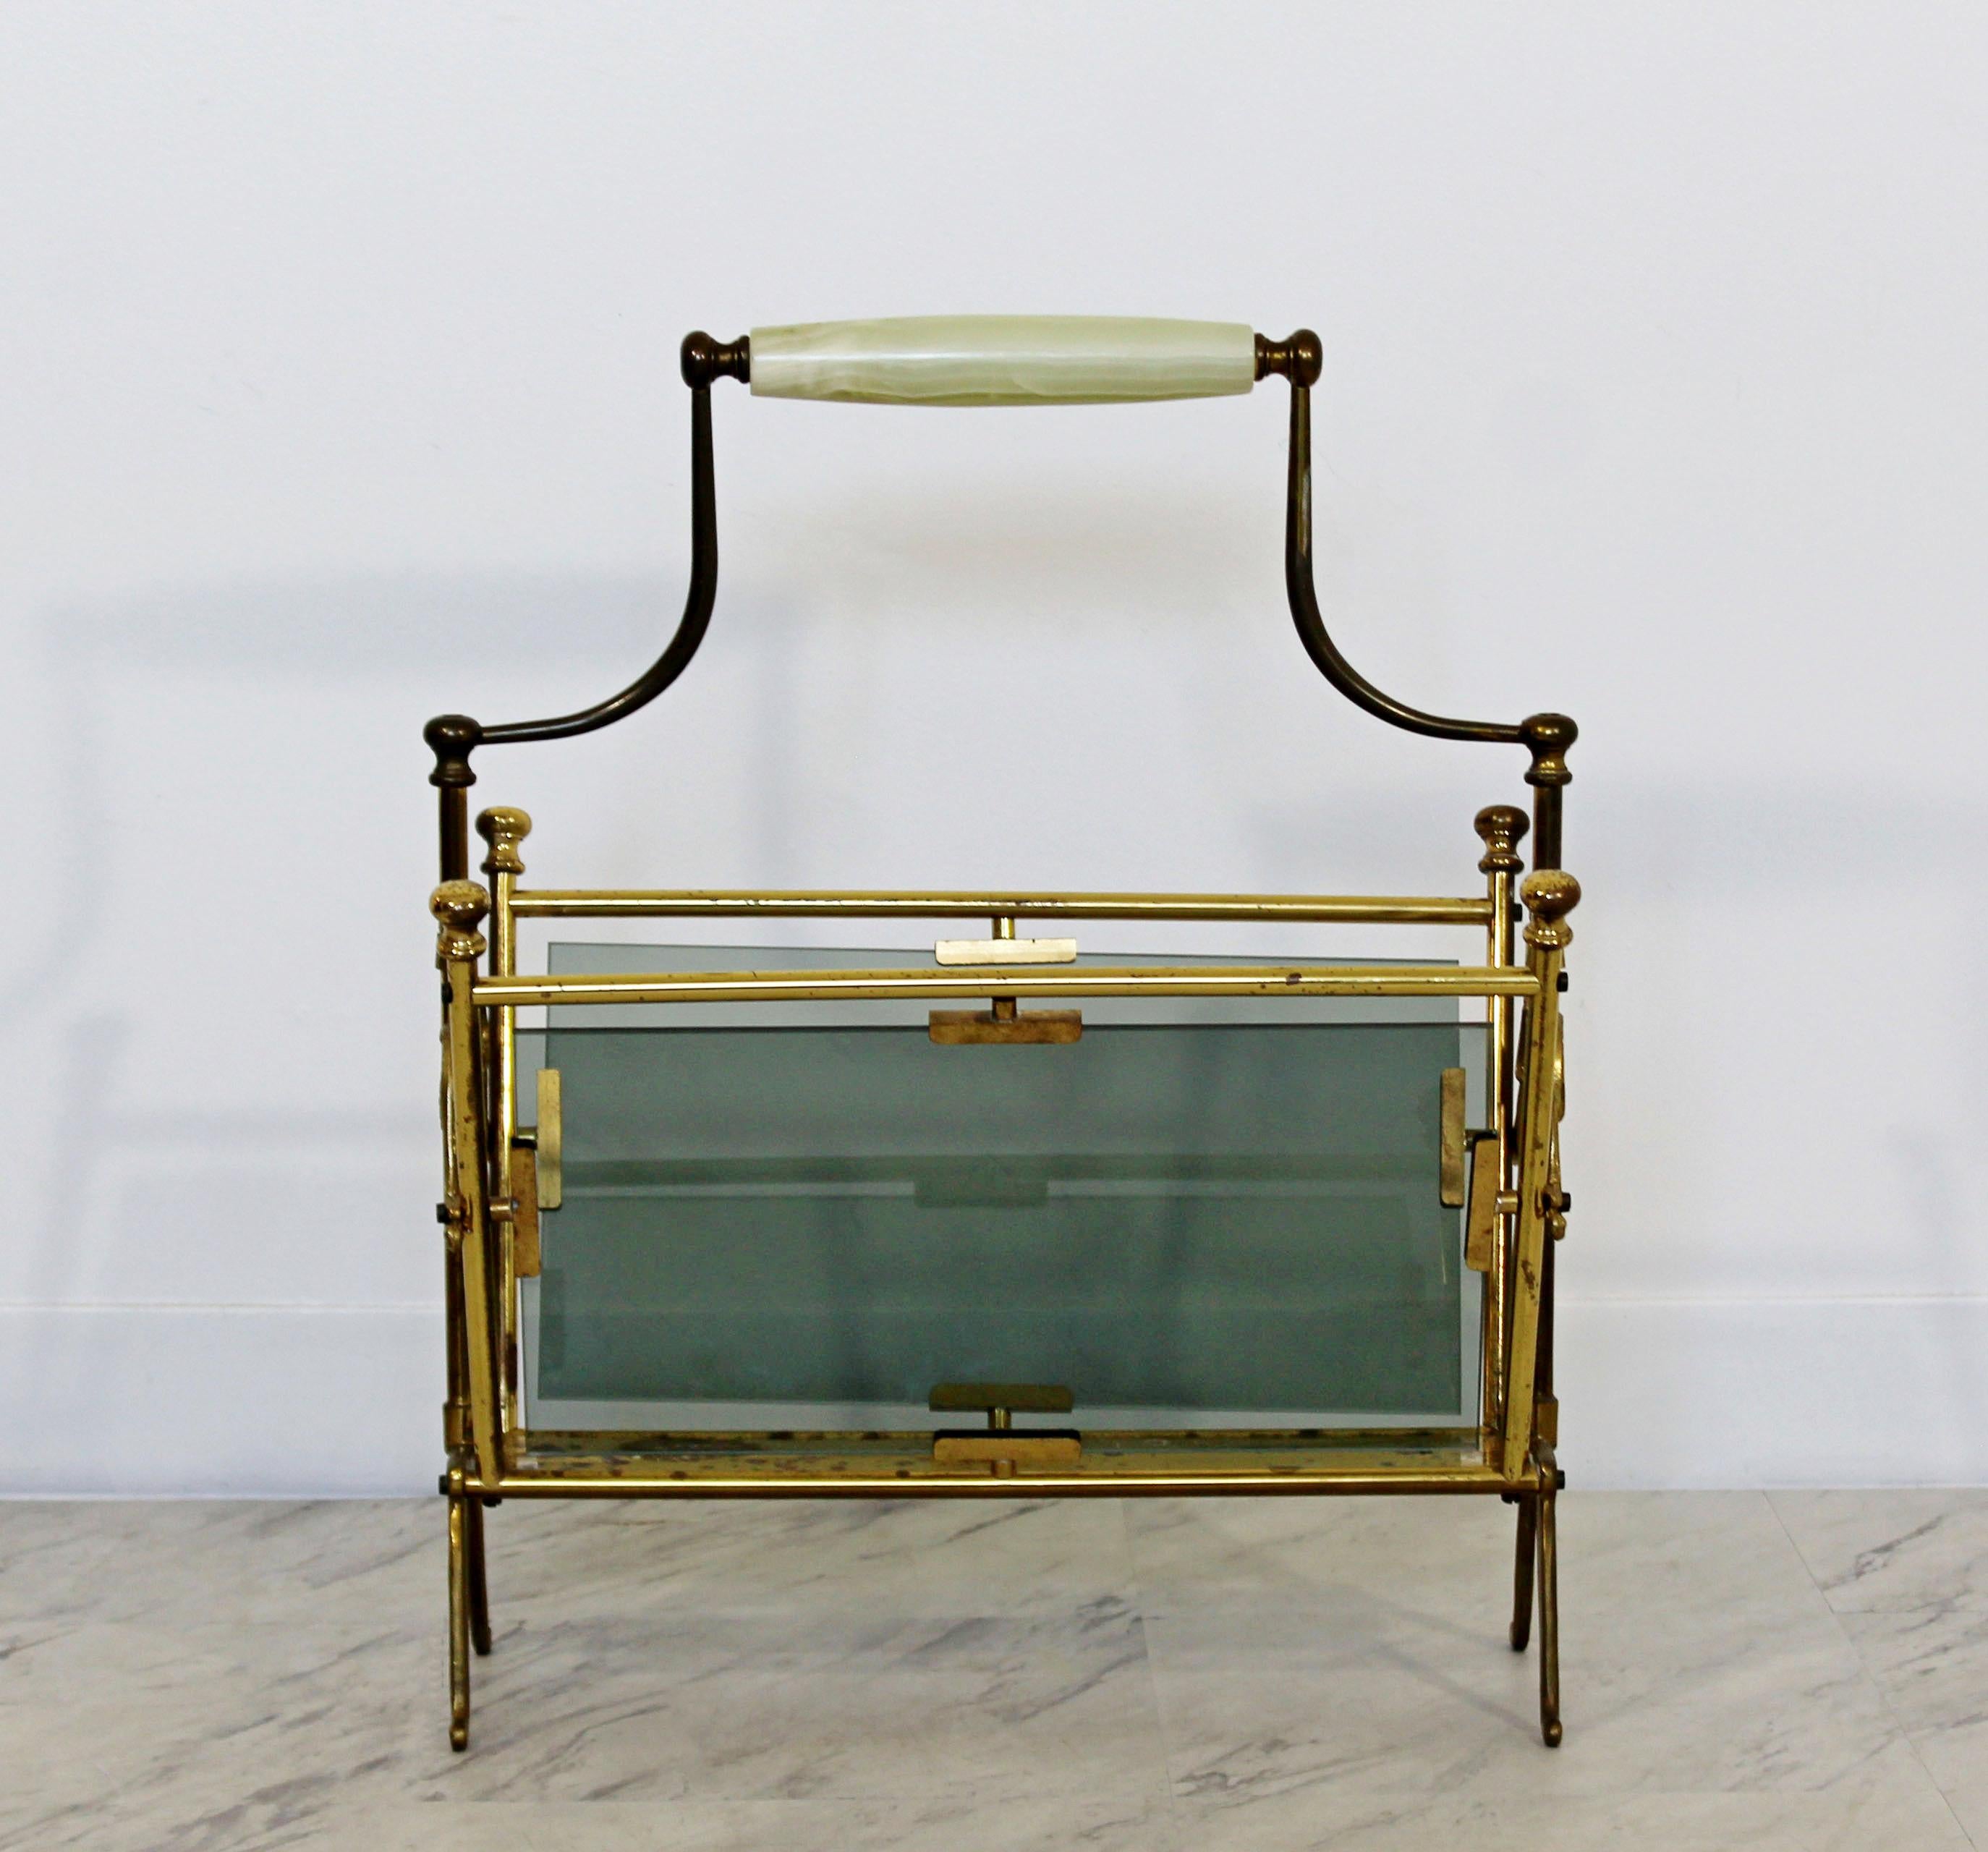 For your consideration is an ornate magazine rack, made of brass, with two smoked glass panels and an opal handle, by Lacca for Fontana Arte, circa the 1950s. In good vintage condition, with a patina to match the age. The dimensions are 18